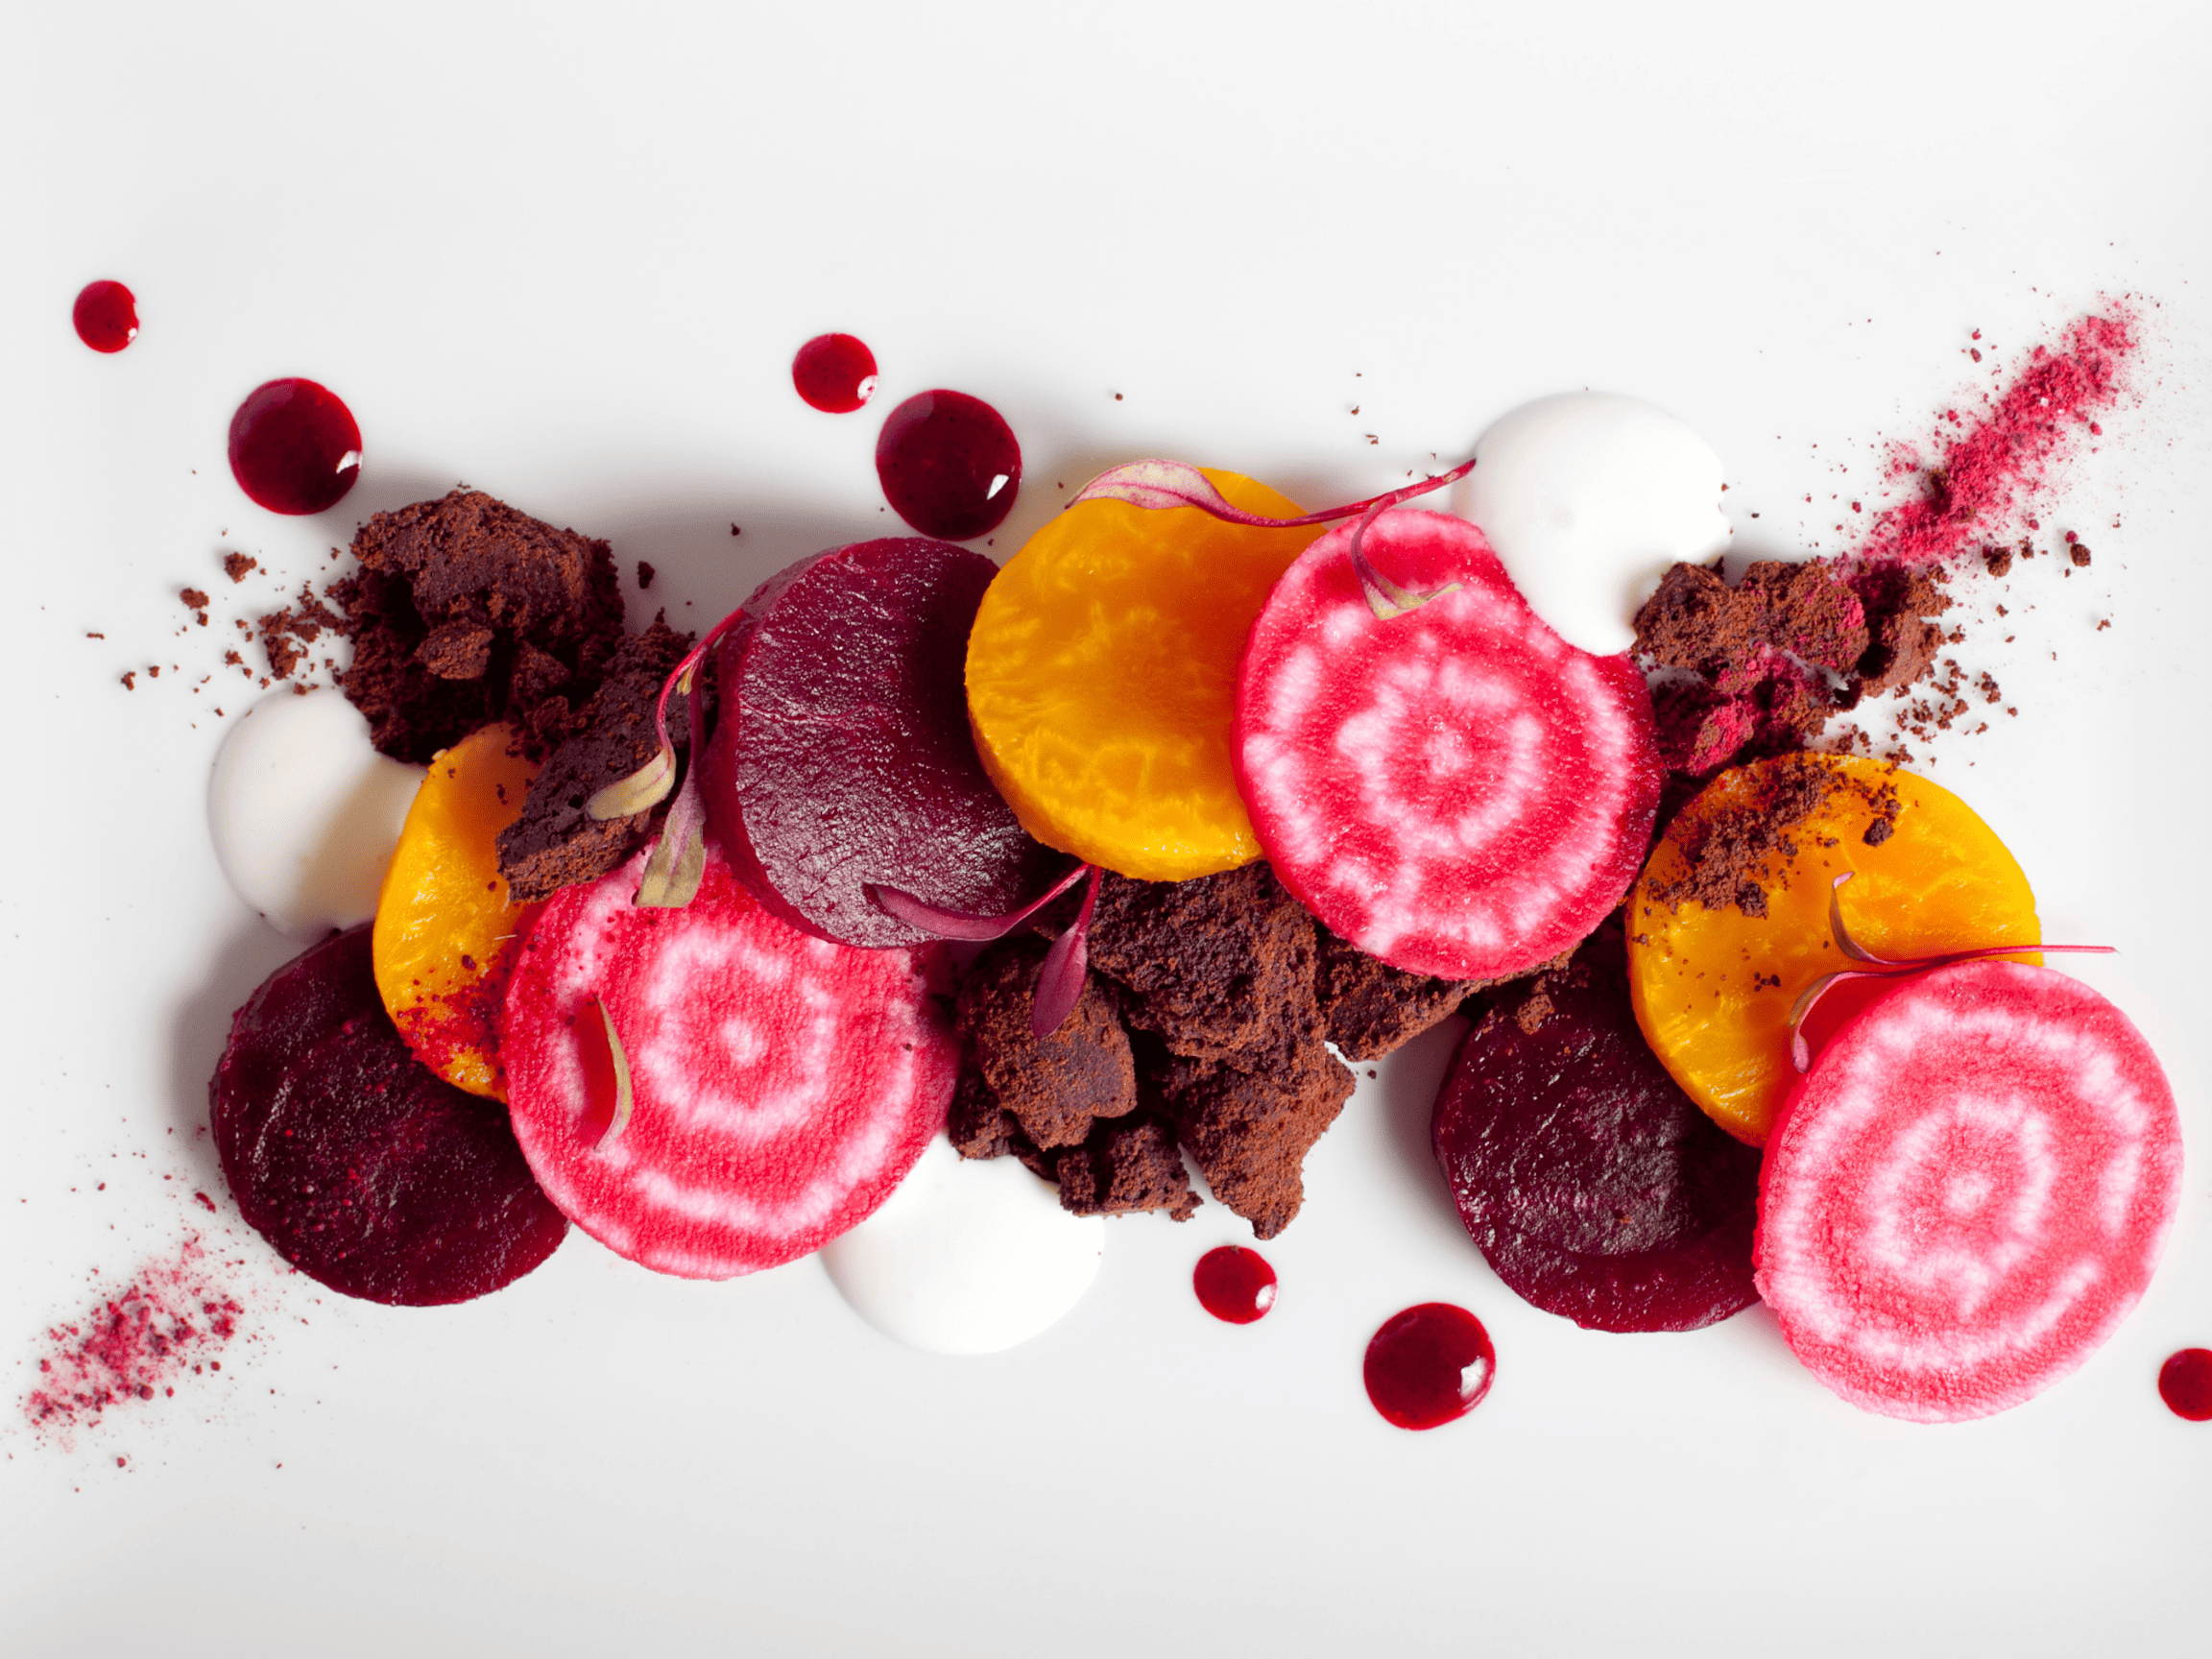 Chioggia beets, golden beets, and red beets sliced up.